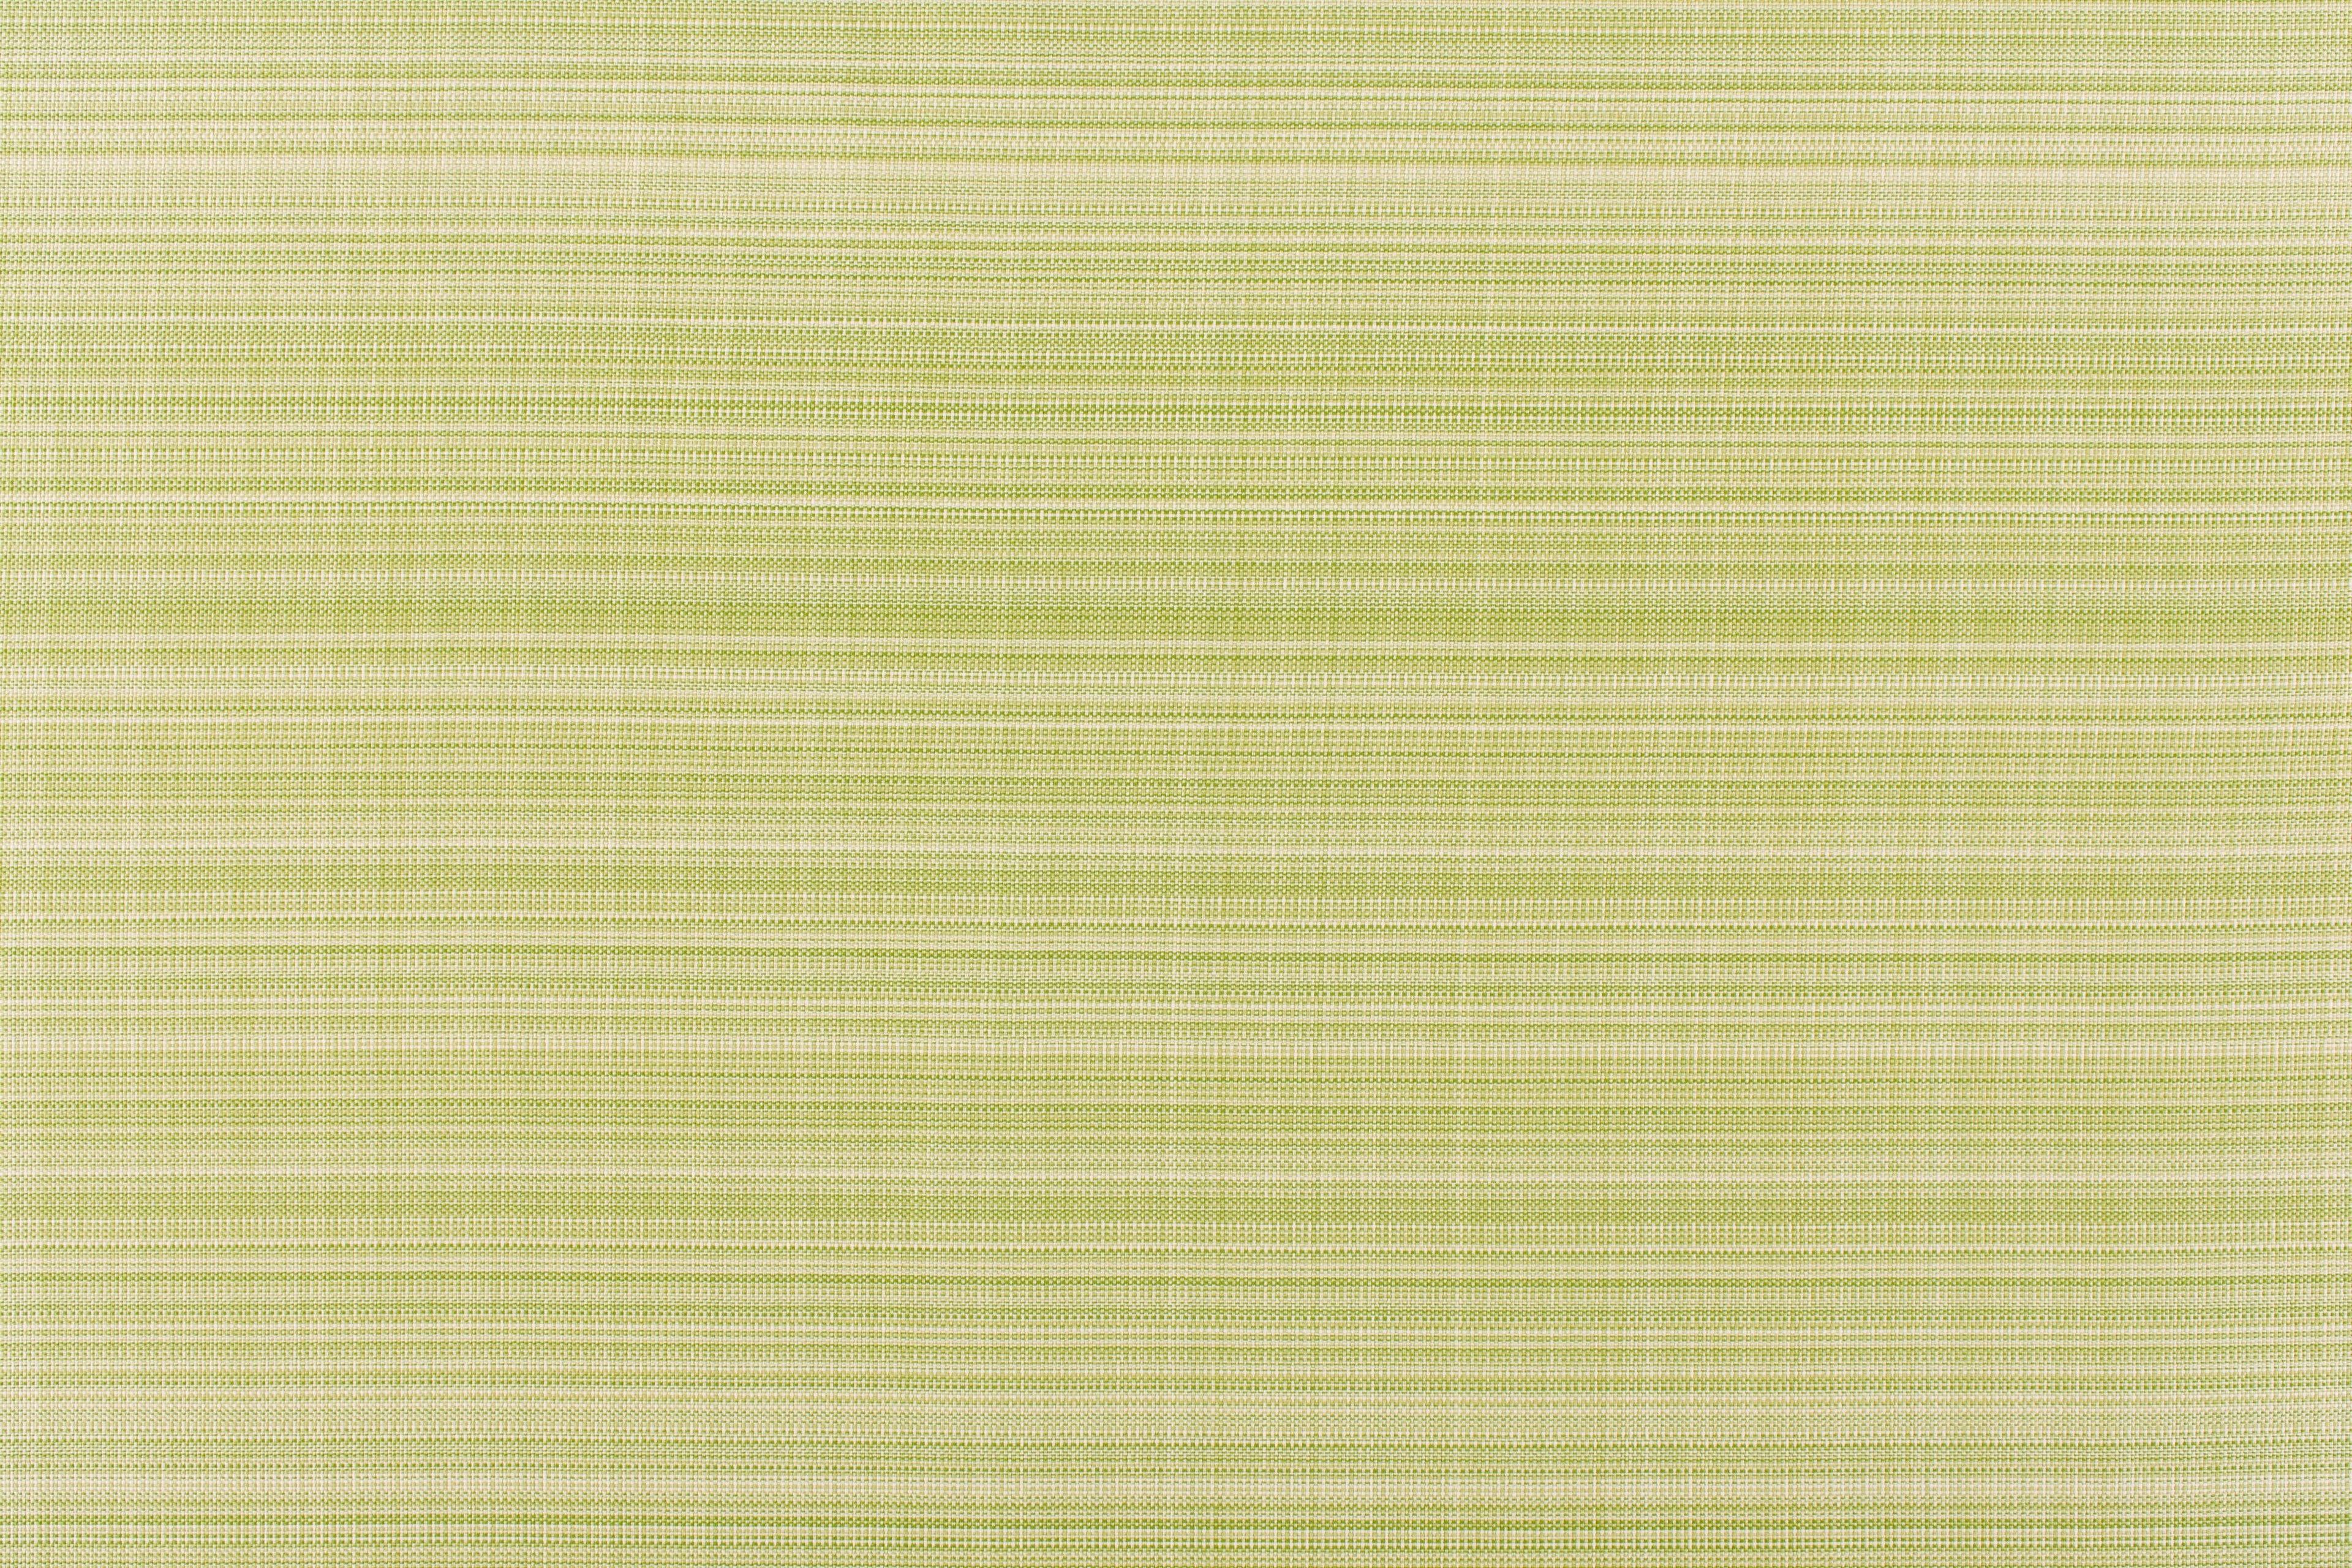 Jettier Beach fabric in grass color - pattern number WR 00032873 - by Scalamandre in the Old World Weavers collection